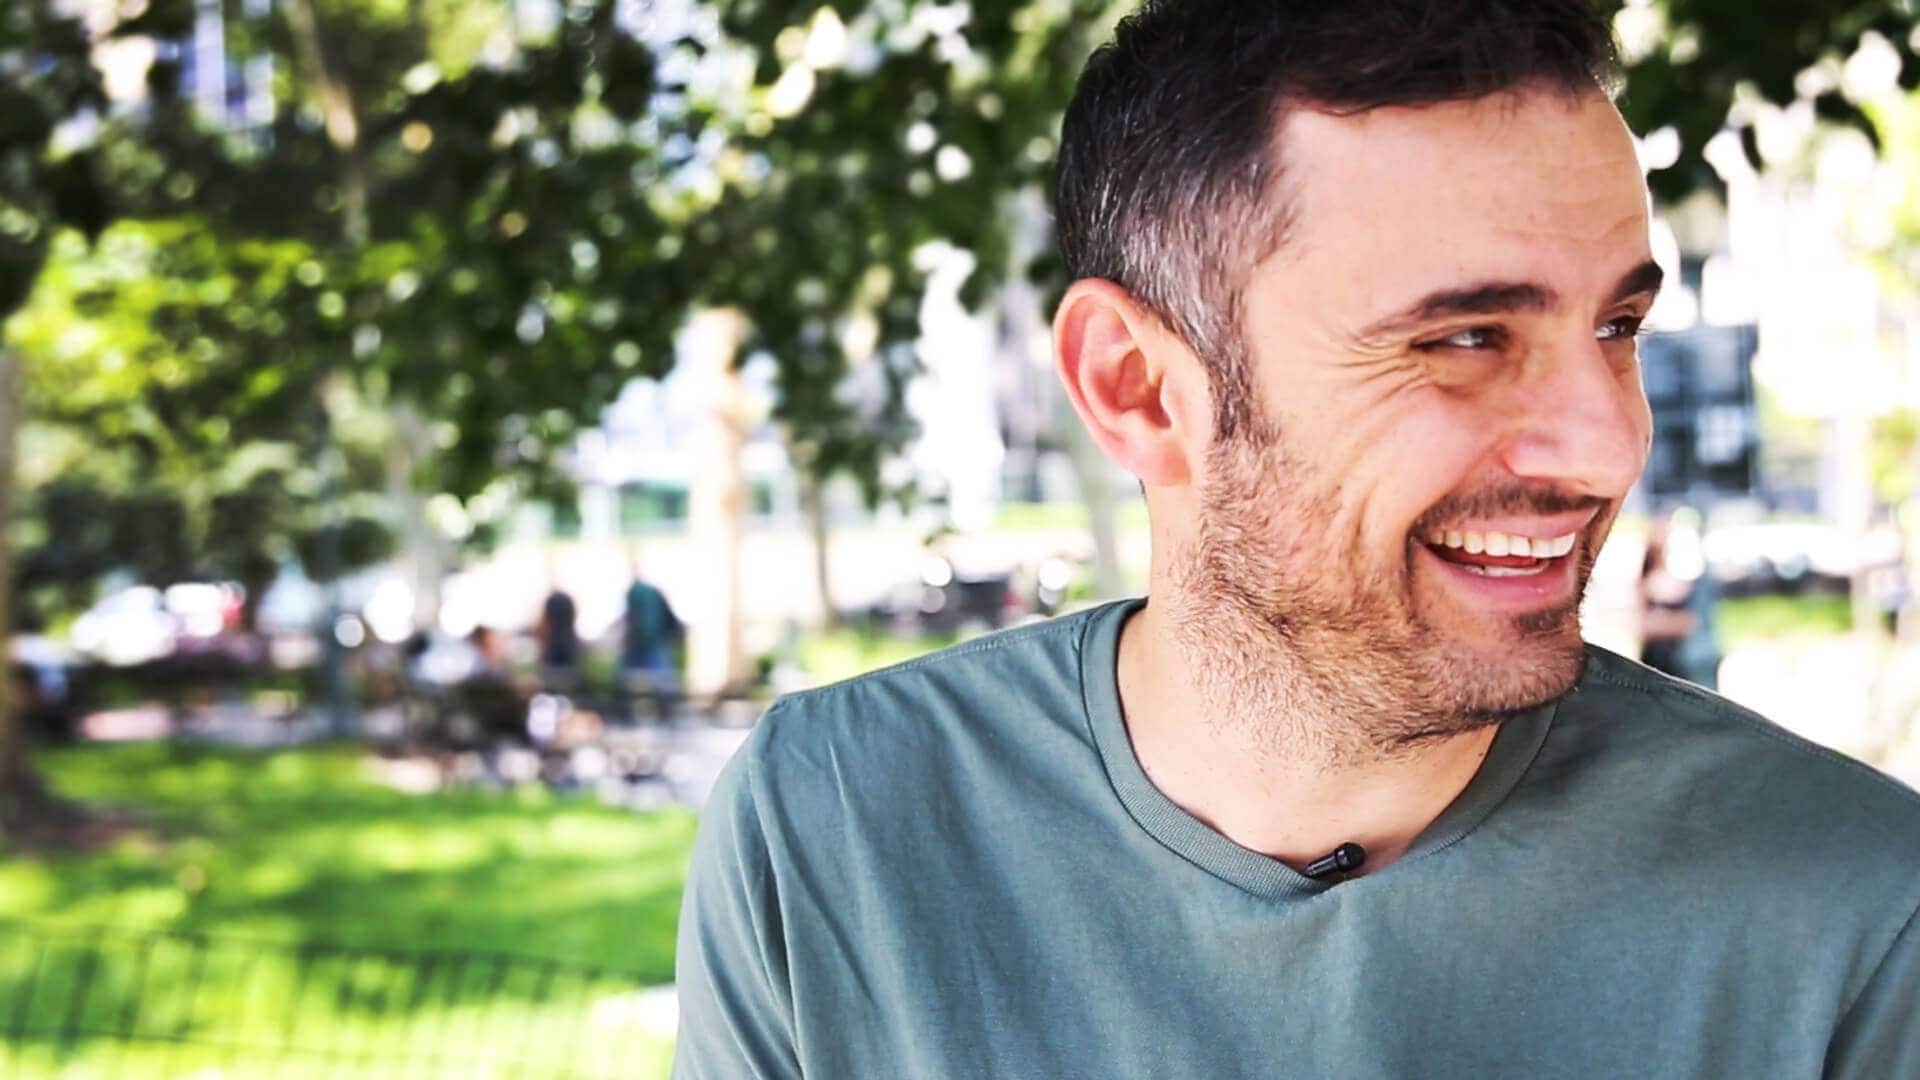 Gary Vaynerchuk filming the #AskGaryVee Show outside in New York City